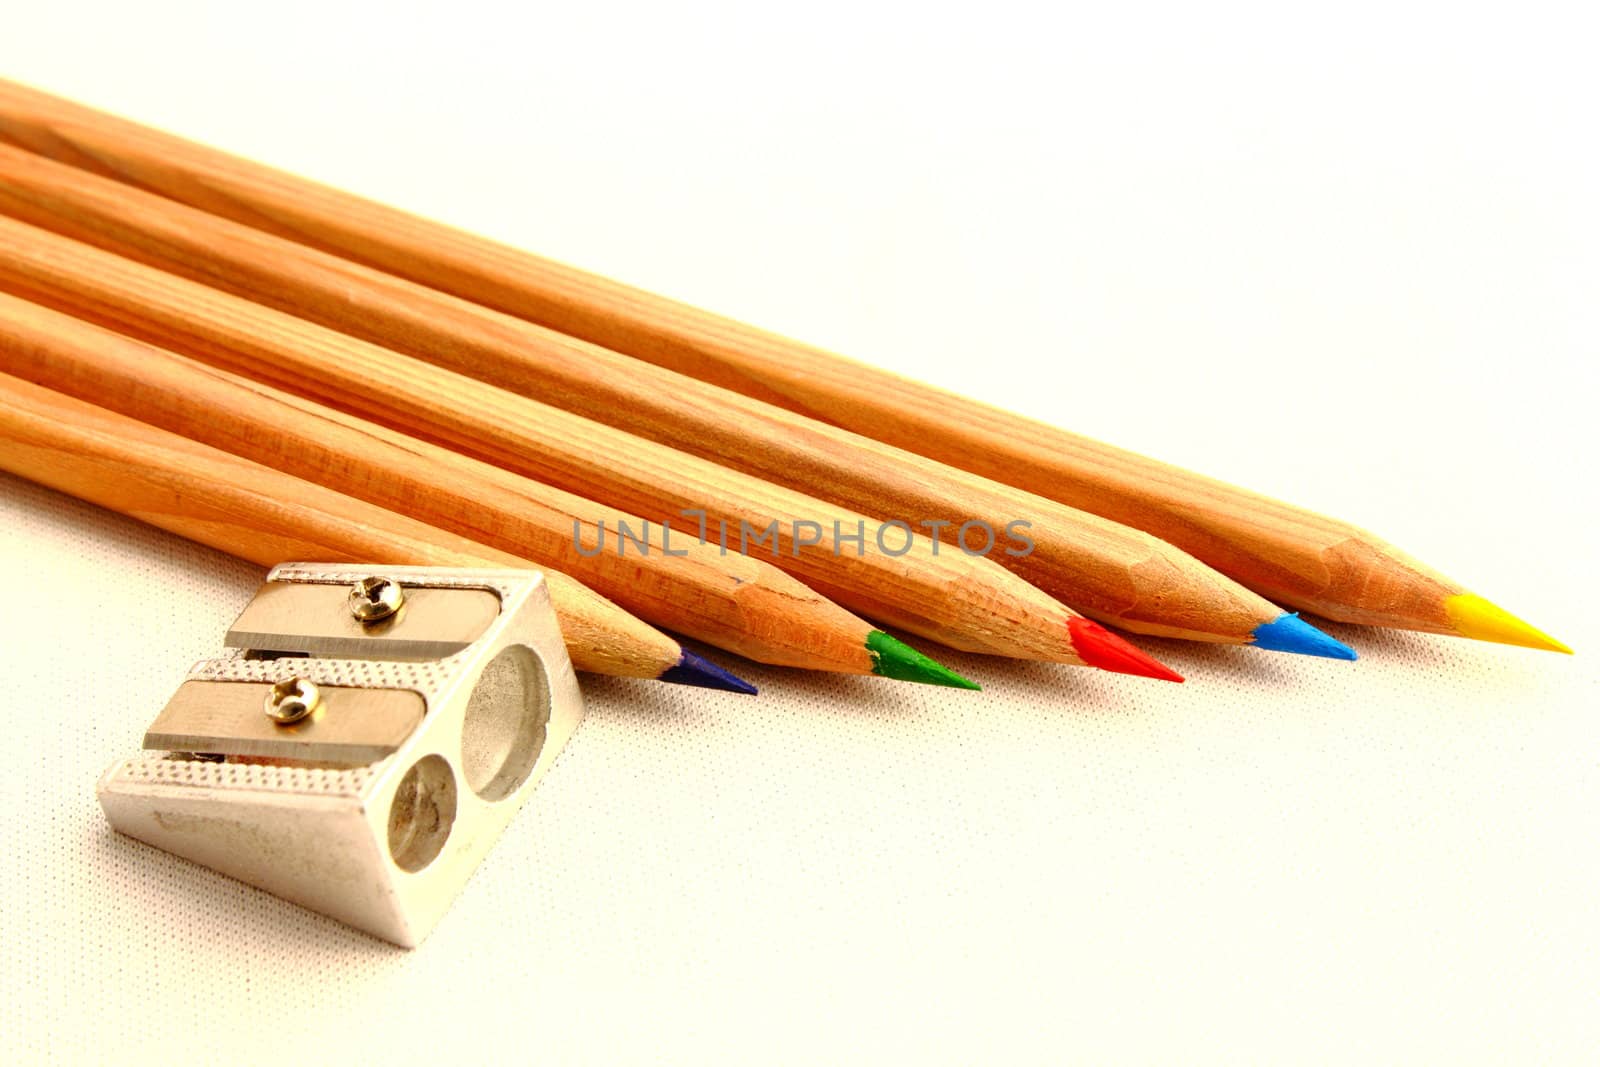 colored crayons and sharpener by taviphoto